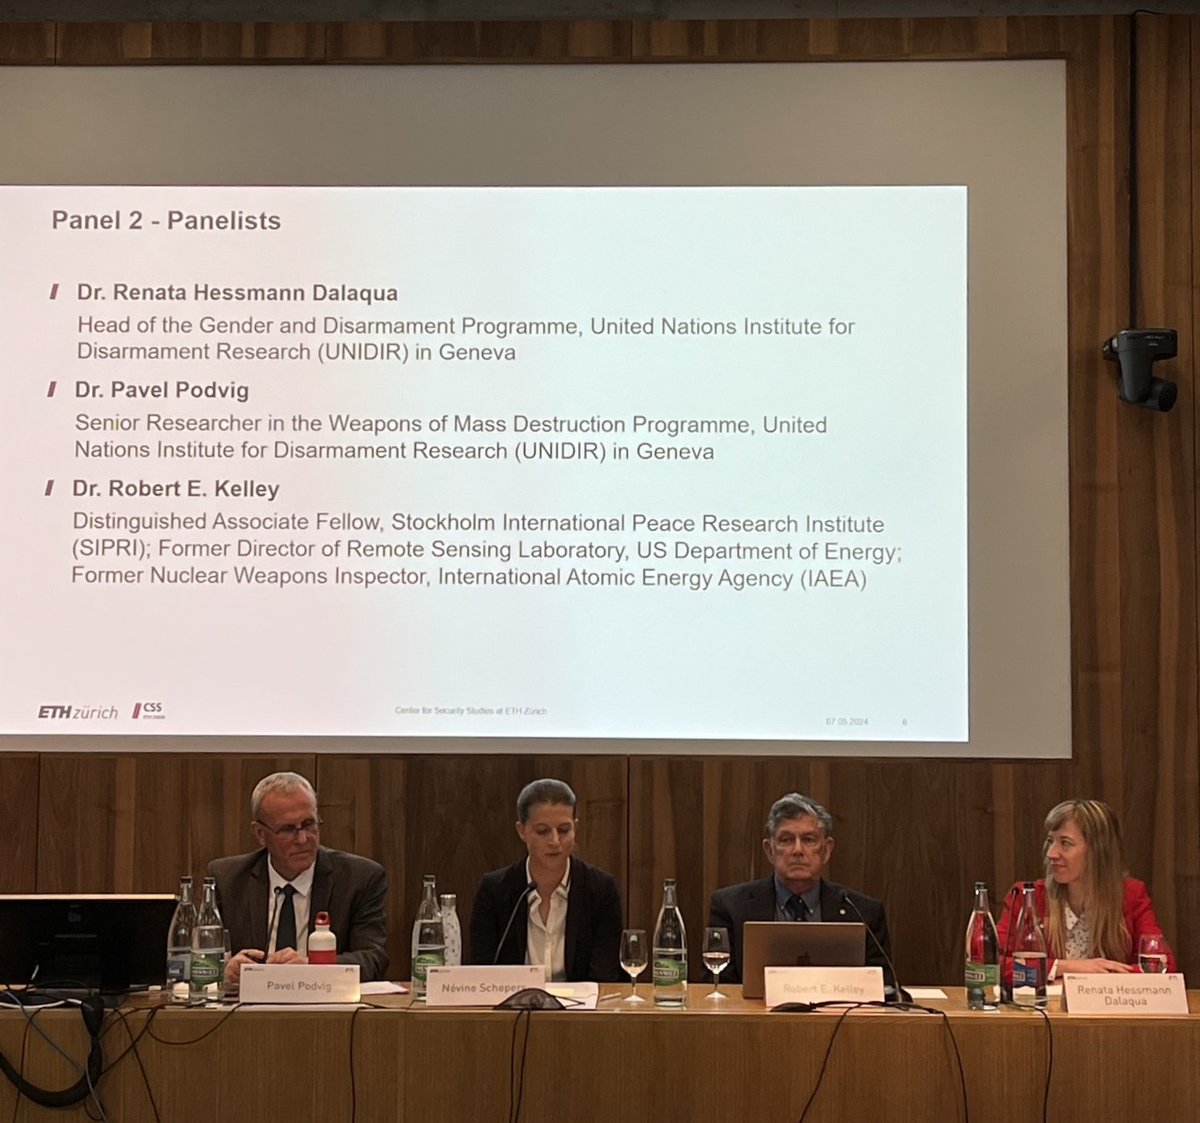 Earlier this week, UNIDIR experts joined a conference organized by @CSS_ETHZurich on theories & tools of nuclear arms control verification. At the closing panel, @redalaqua & @russianforces offered insights on innovations & challenges affecting nuclear arms control & disarmament.